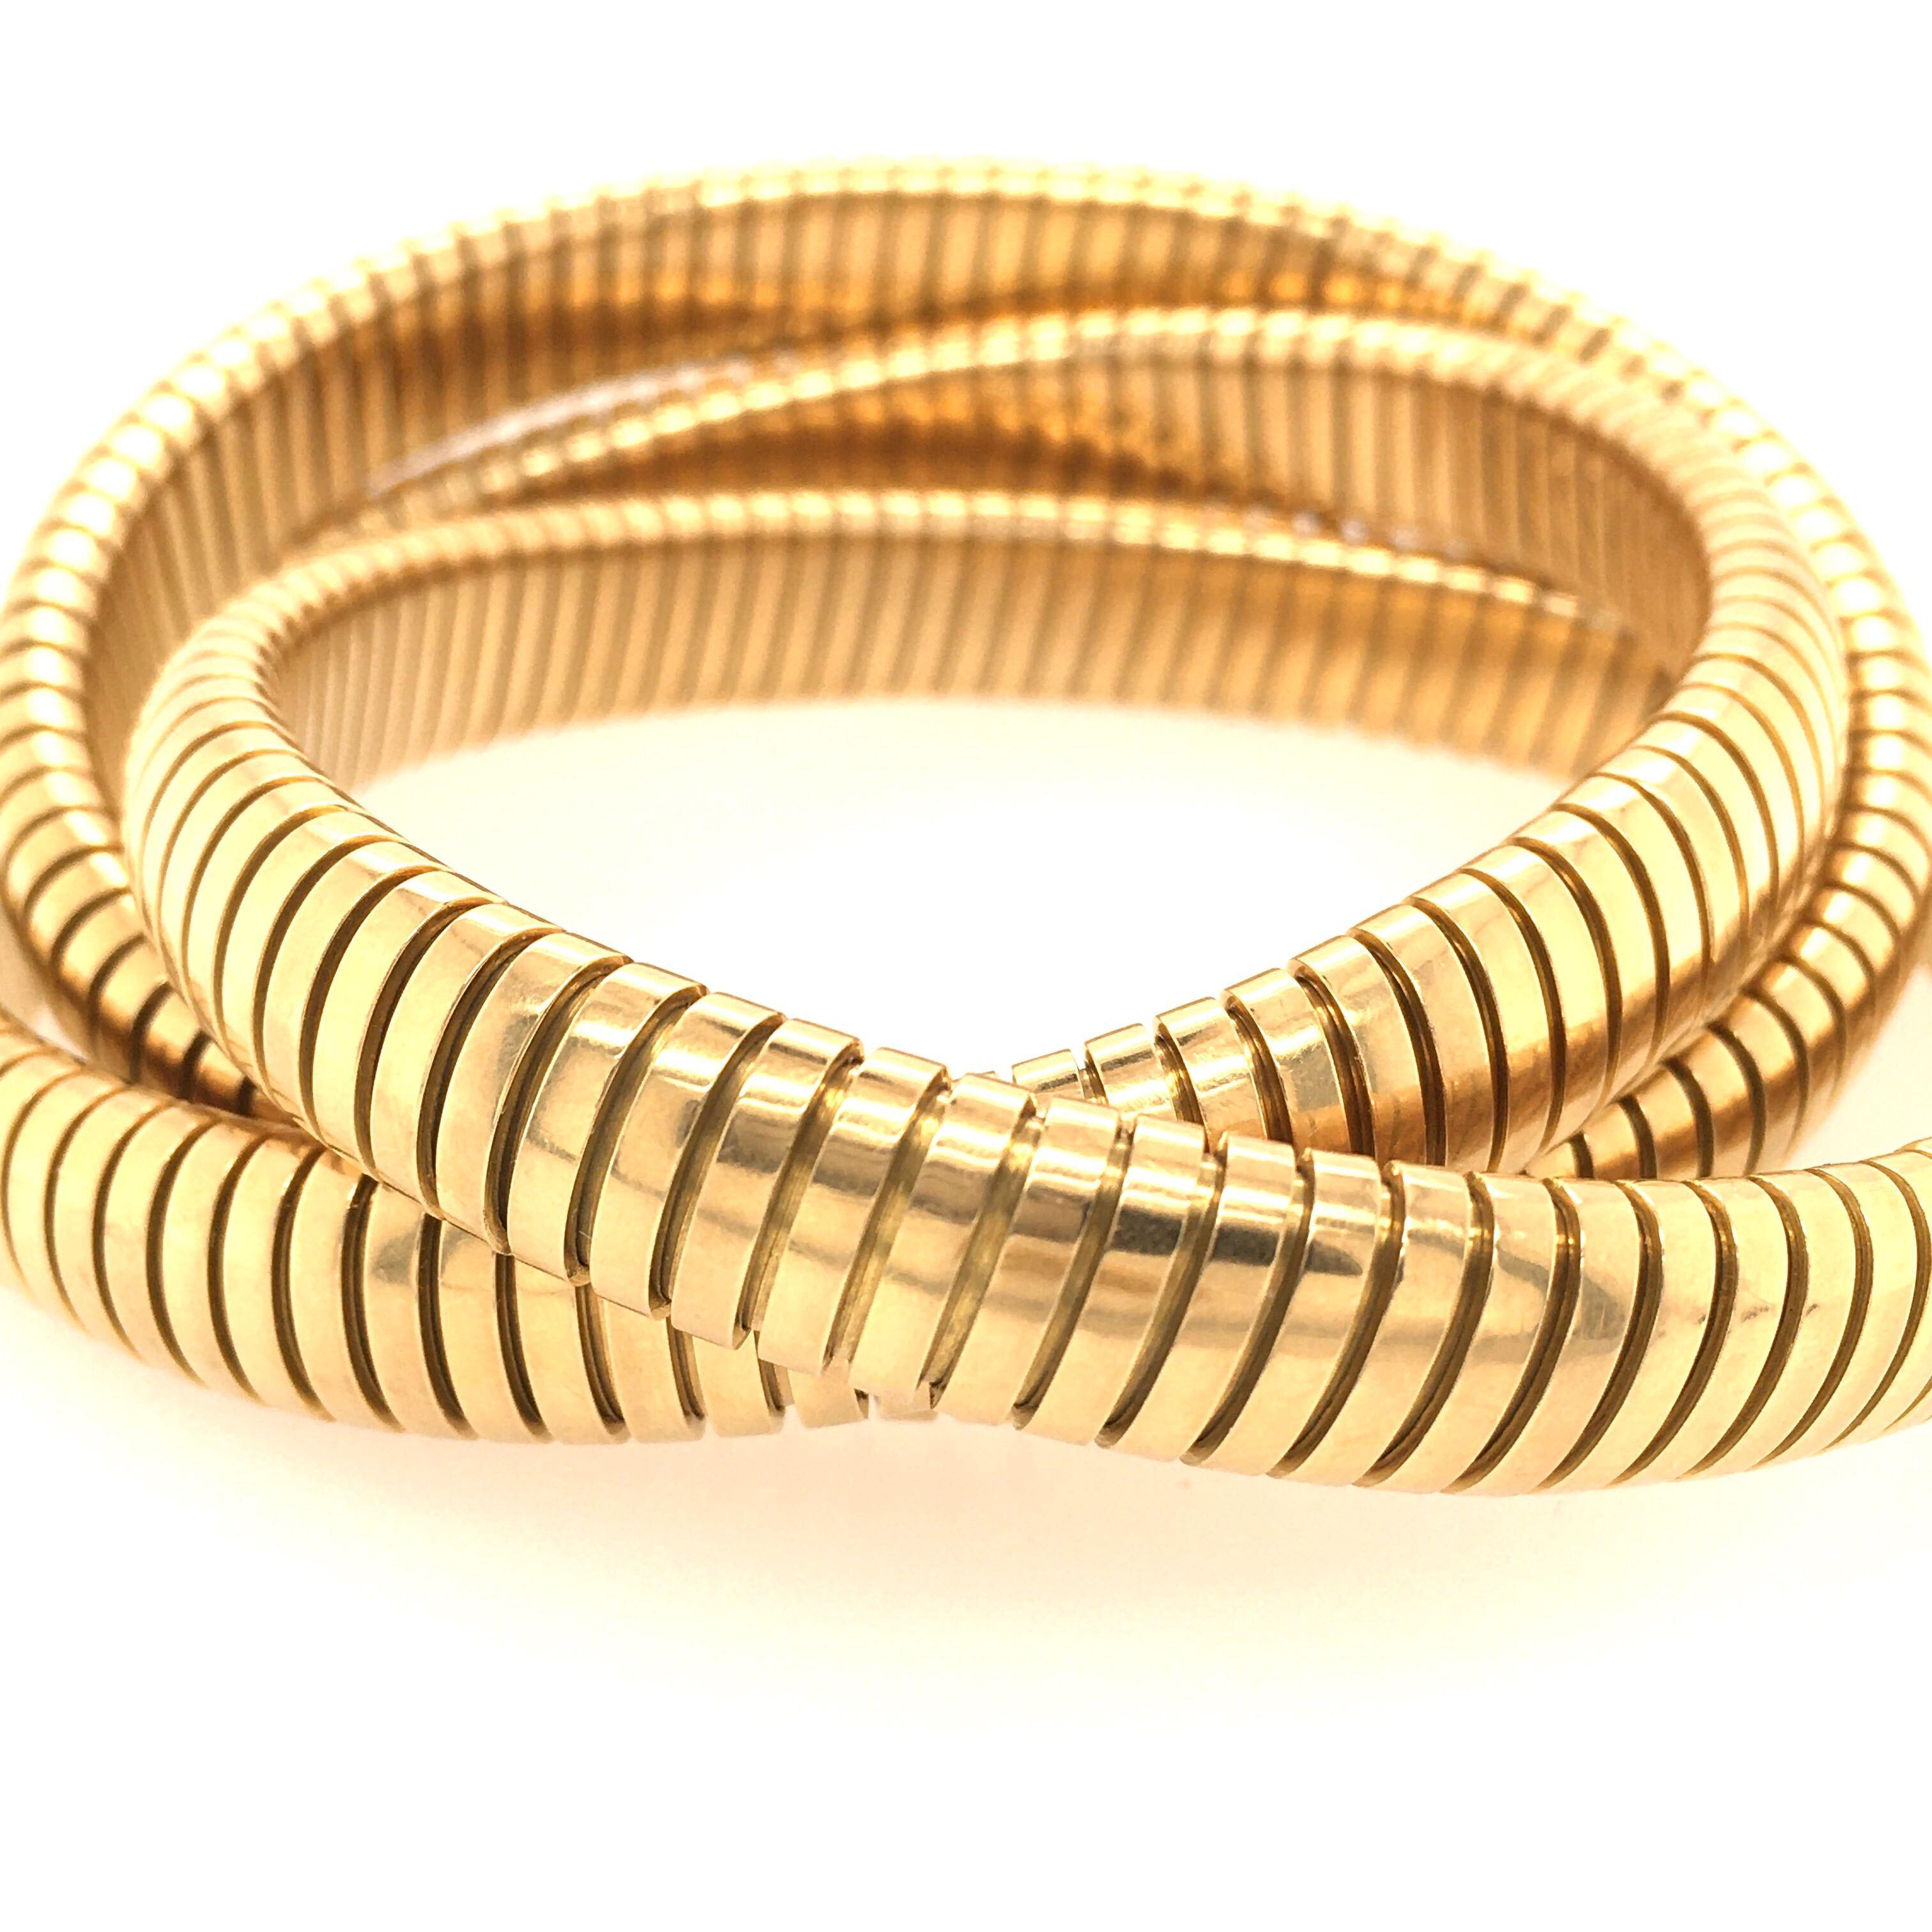 An 18 karat yellow gold bracelet. Italian. Designed as three (3) interlocking slightly flexible gaspipe  bracelets. Inside measurement is approximately 7 inches, gross weight is approximately 124.6 grams. 